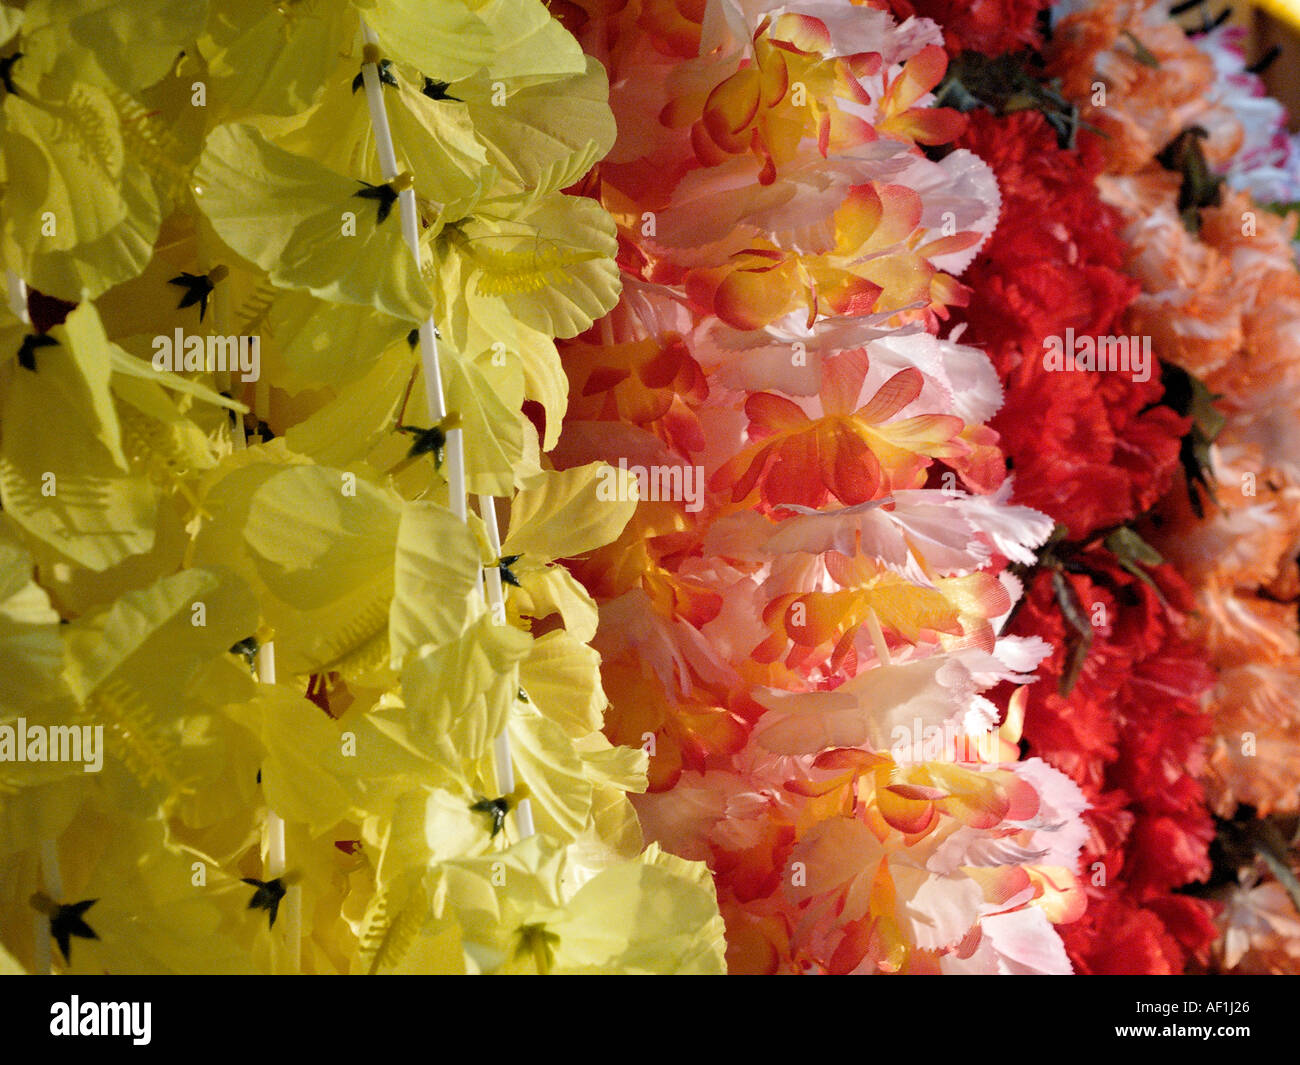 Leis on display in a local surf shop Stock Photo